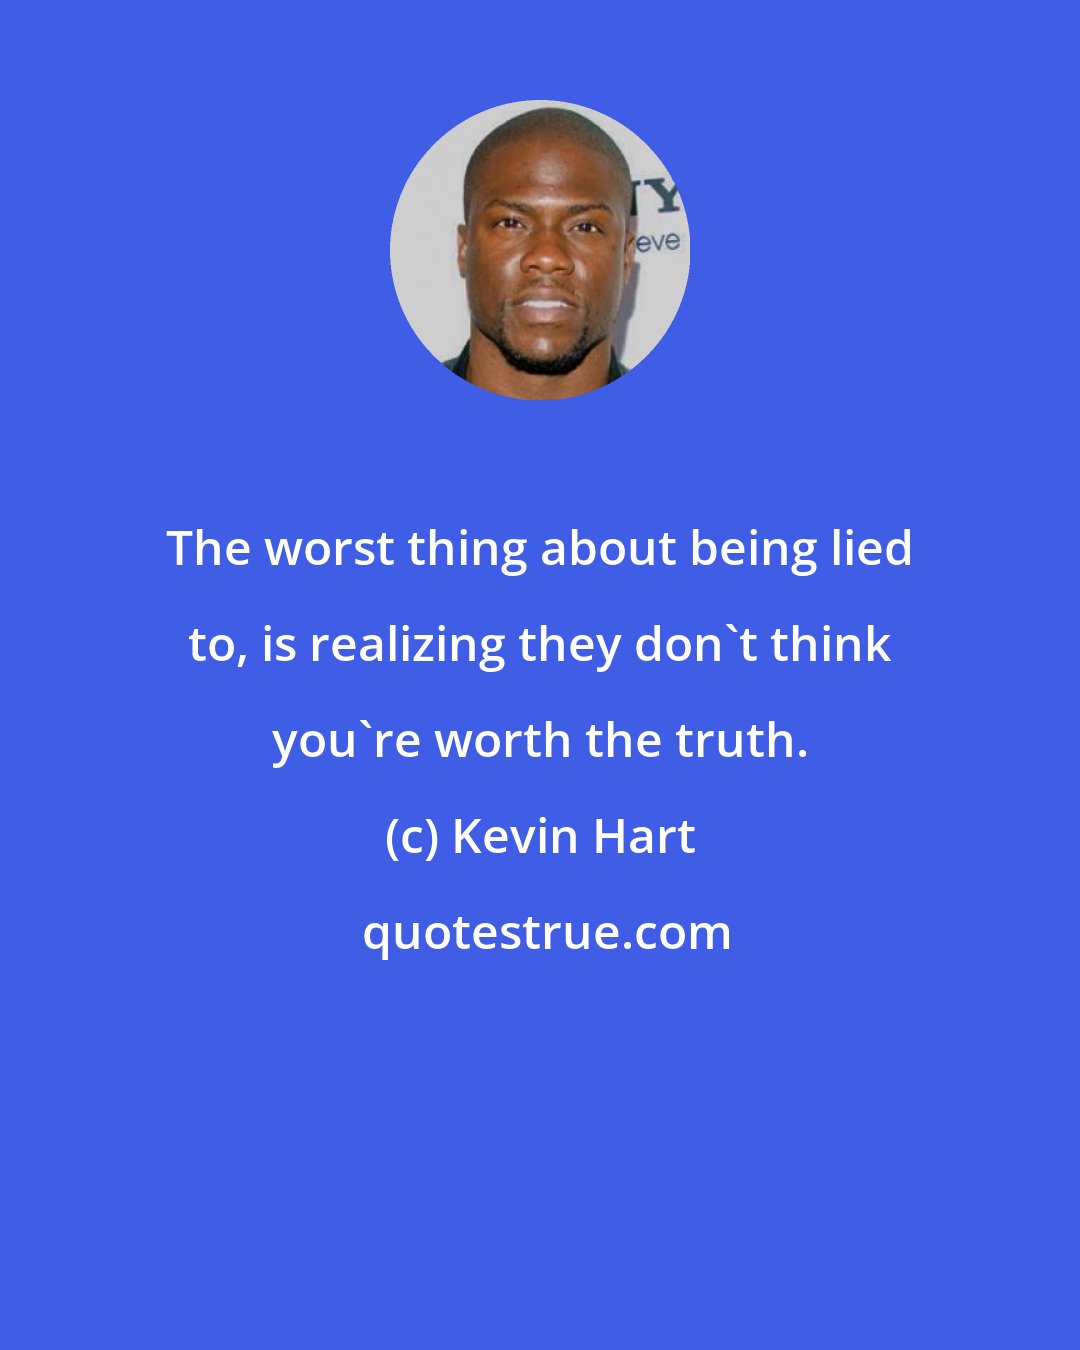 Kevin Hart: The worst thing about being lied to, is realizing they don't think you're worth the truth.